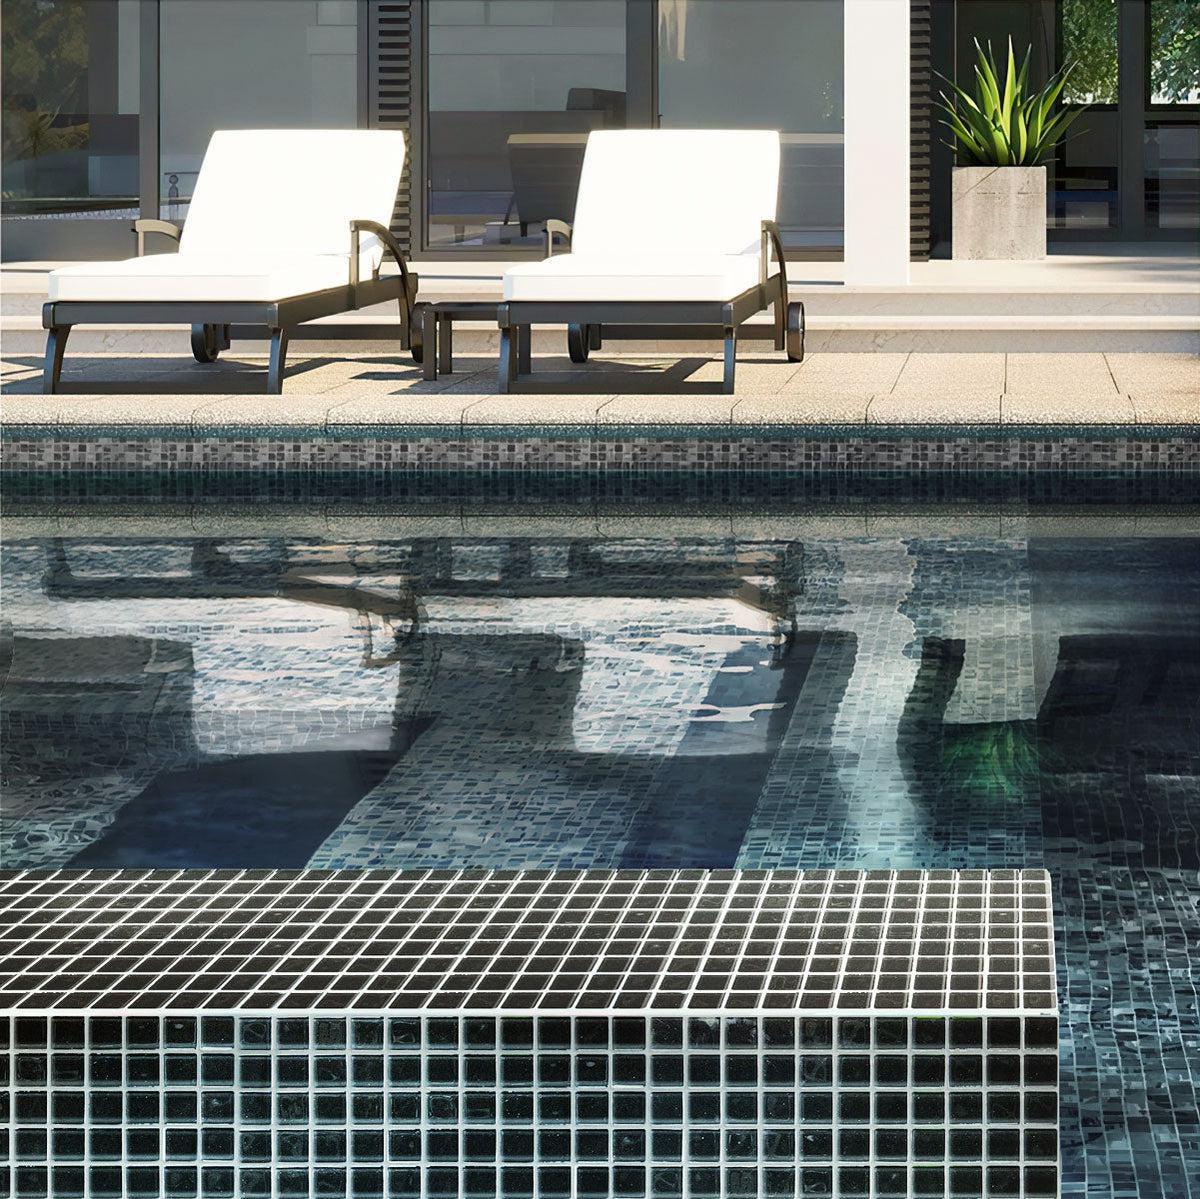 Black polished glass tile swimming pool facing in sunlight